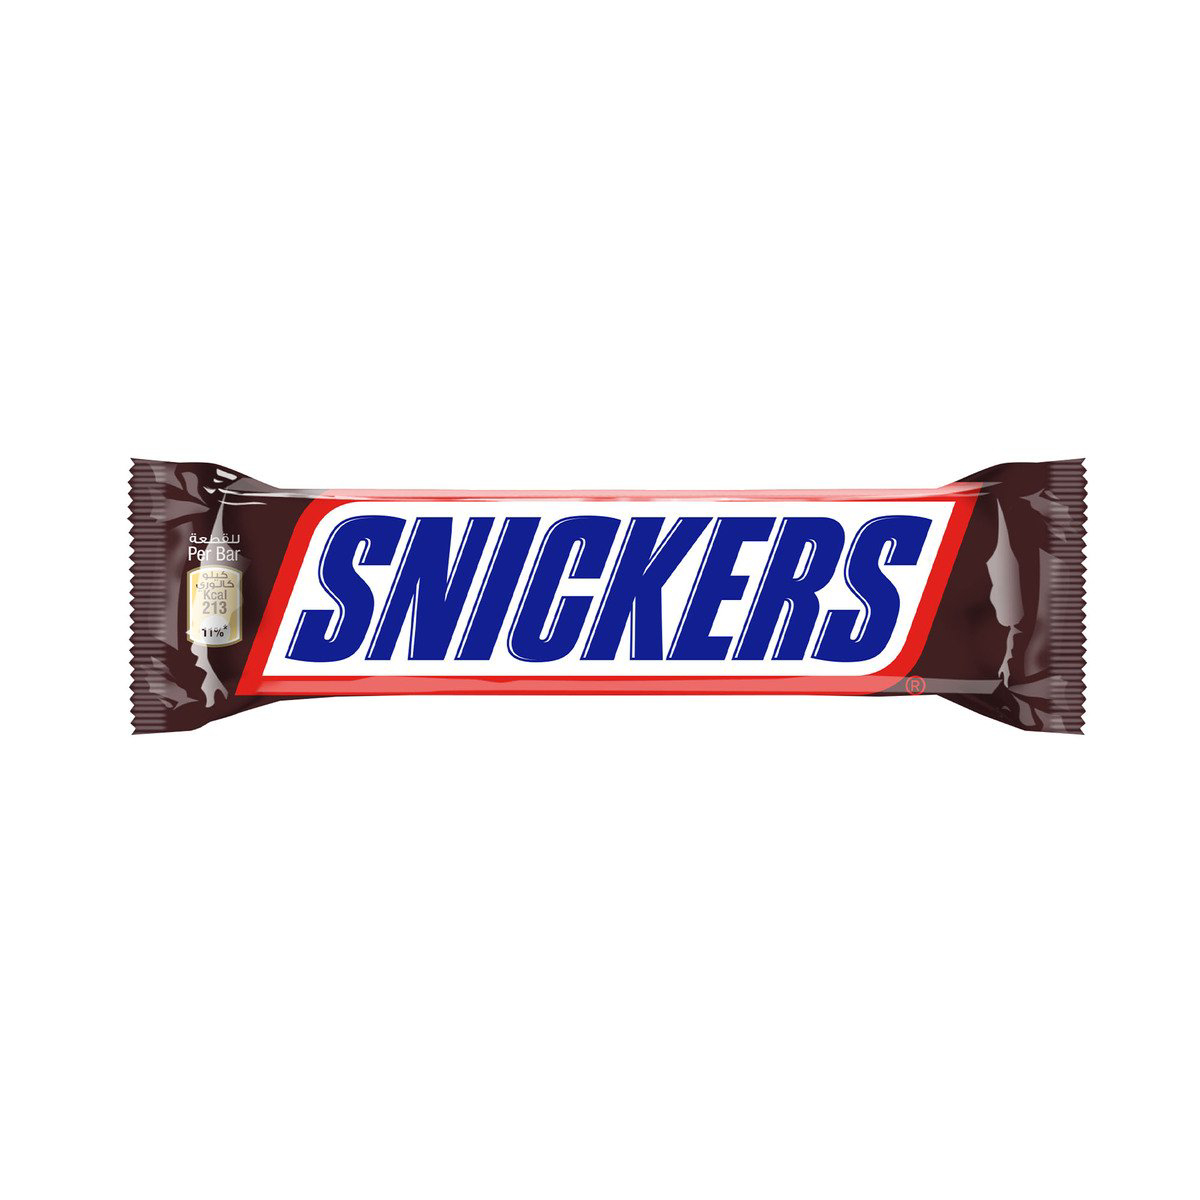 Snickers Chocolate 20 x 45 g Online at Best Price | Covrd Choco.Bars ...